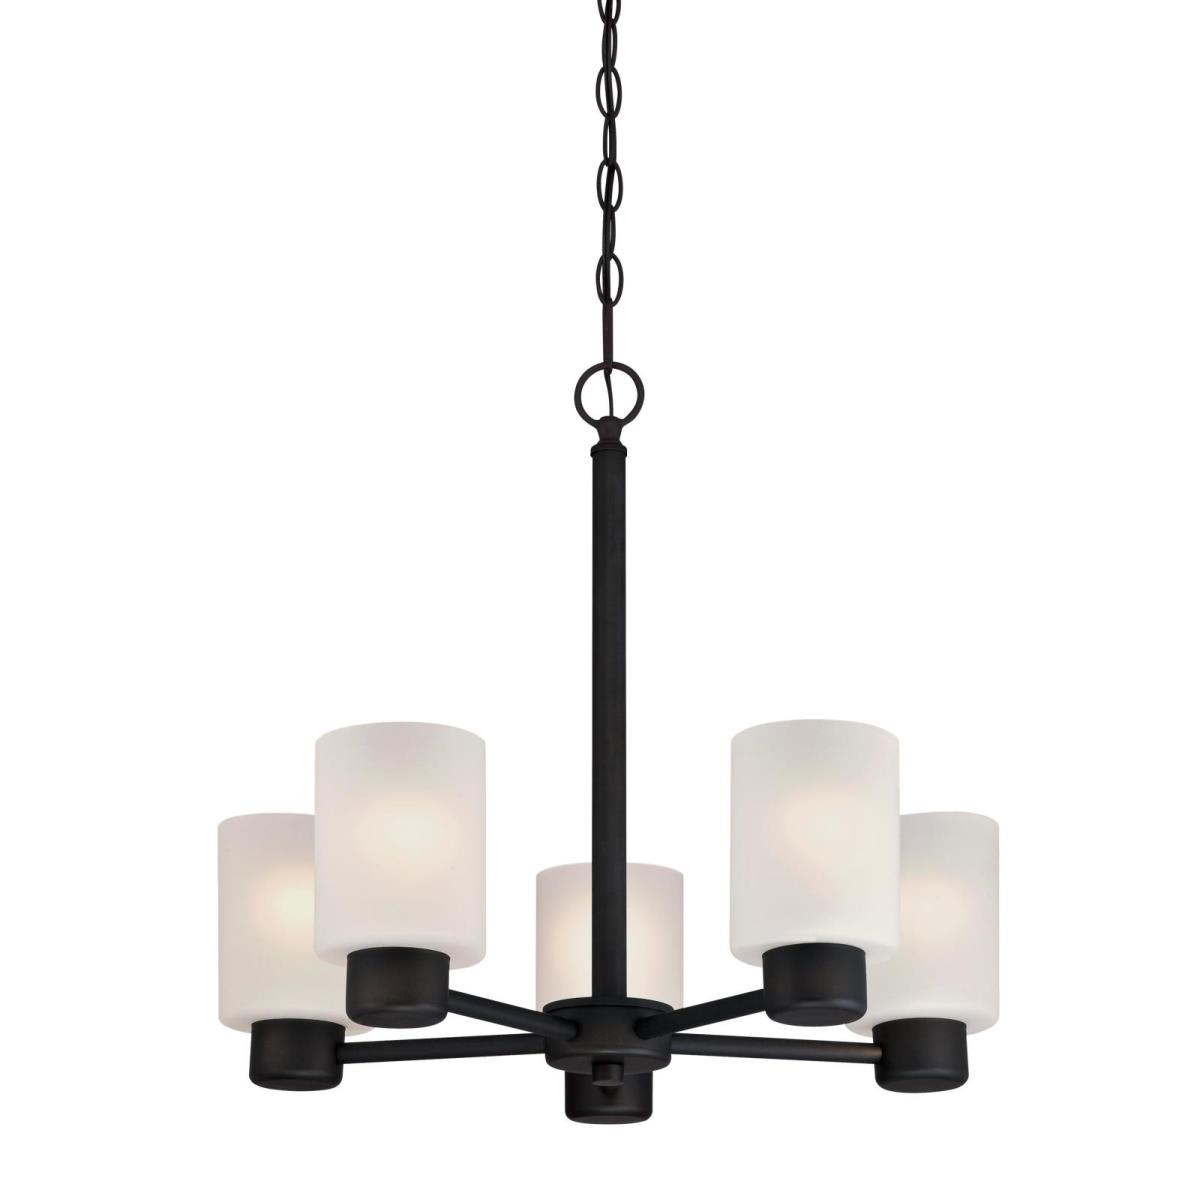 5 Light Chandelier Oil Rubbed Bronze Finish with Frosted Glass